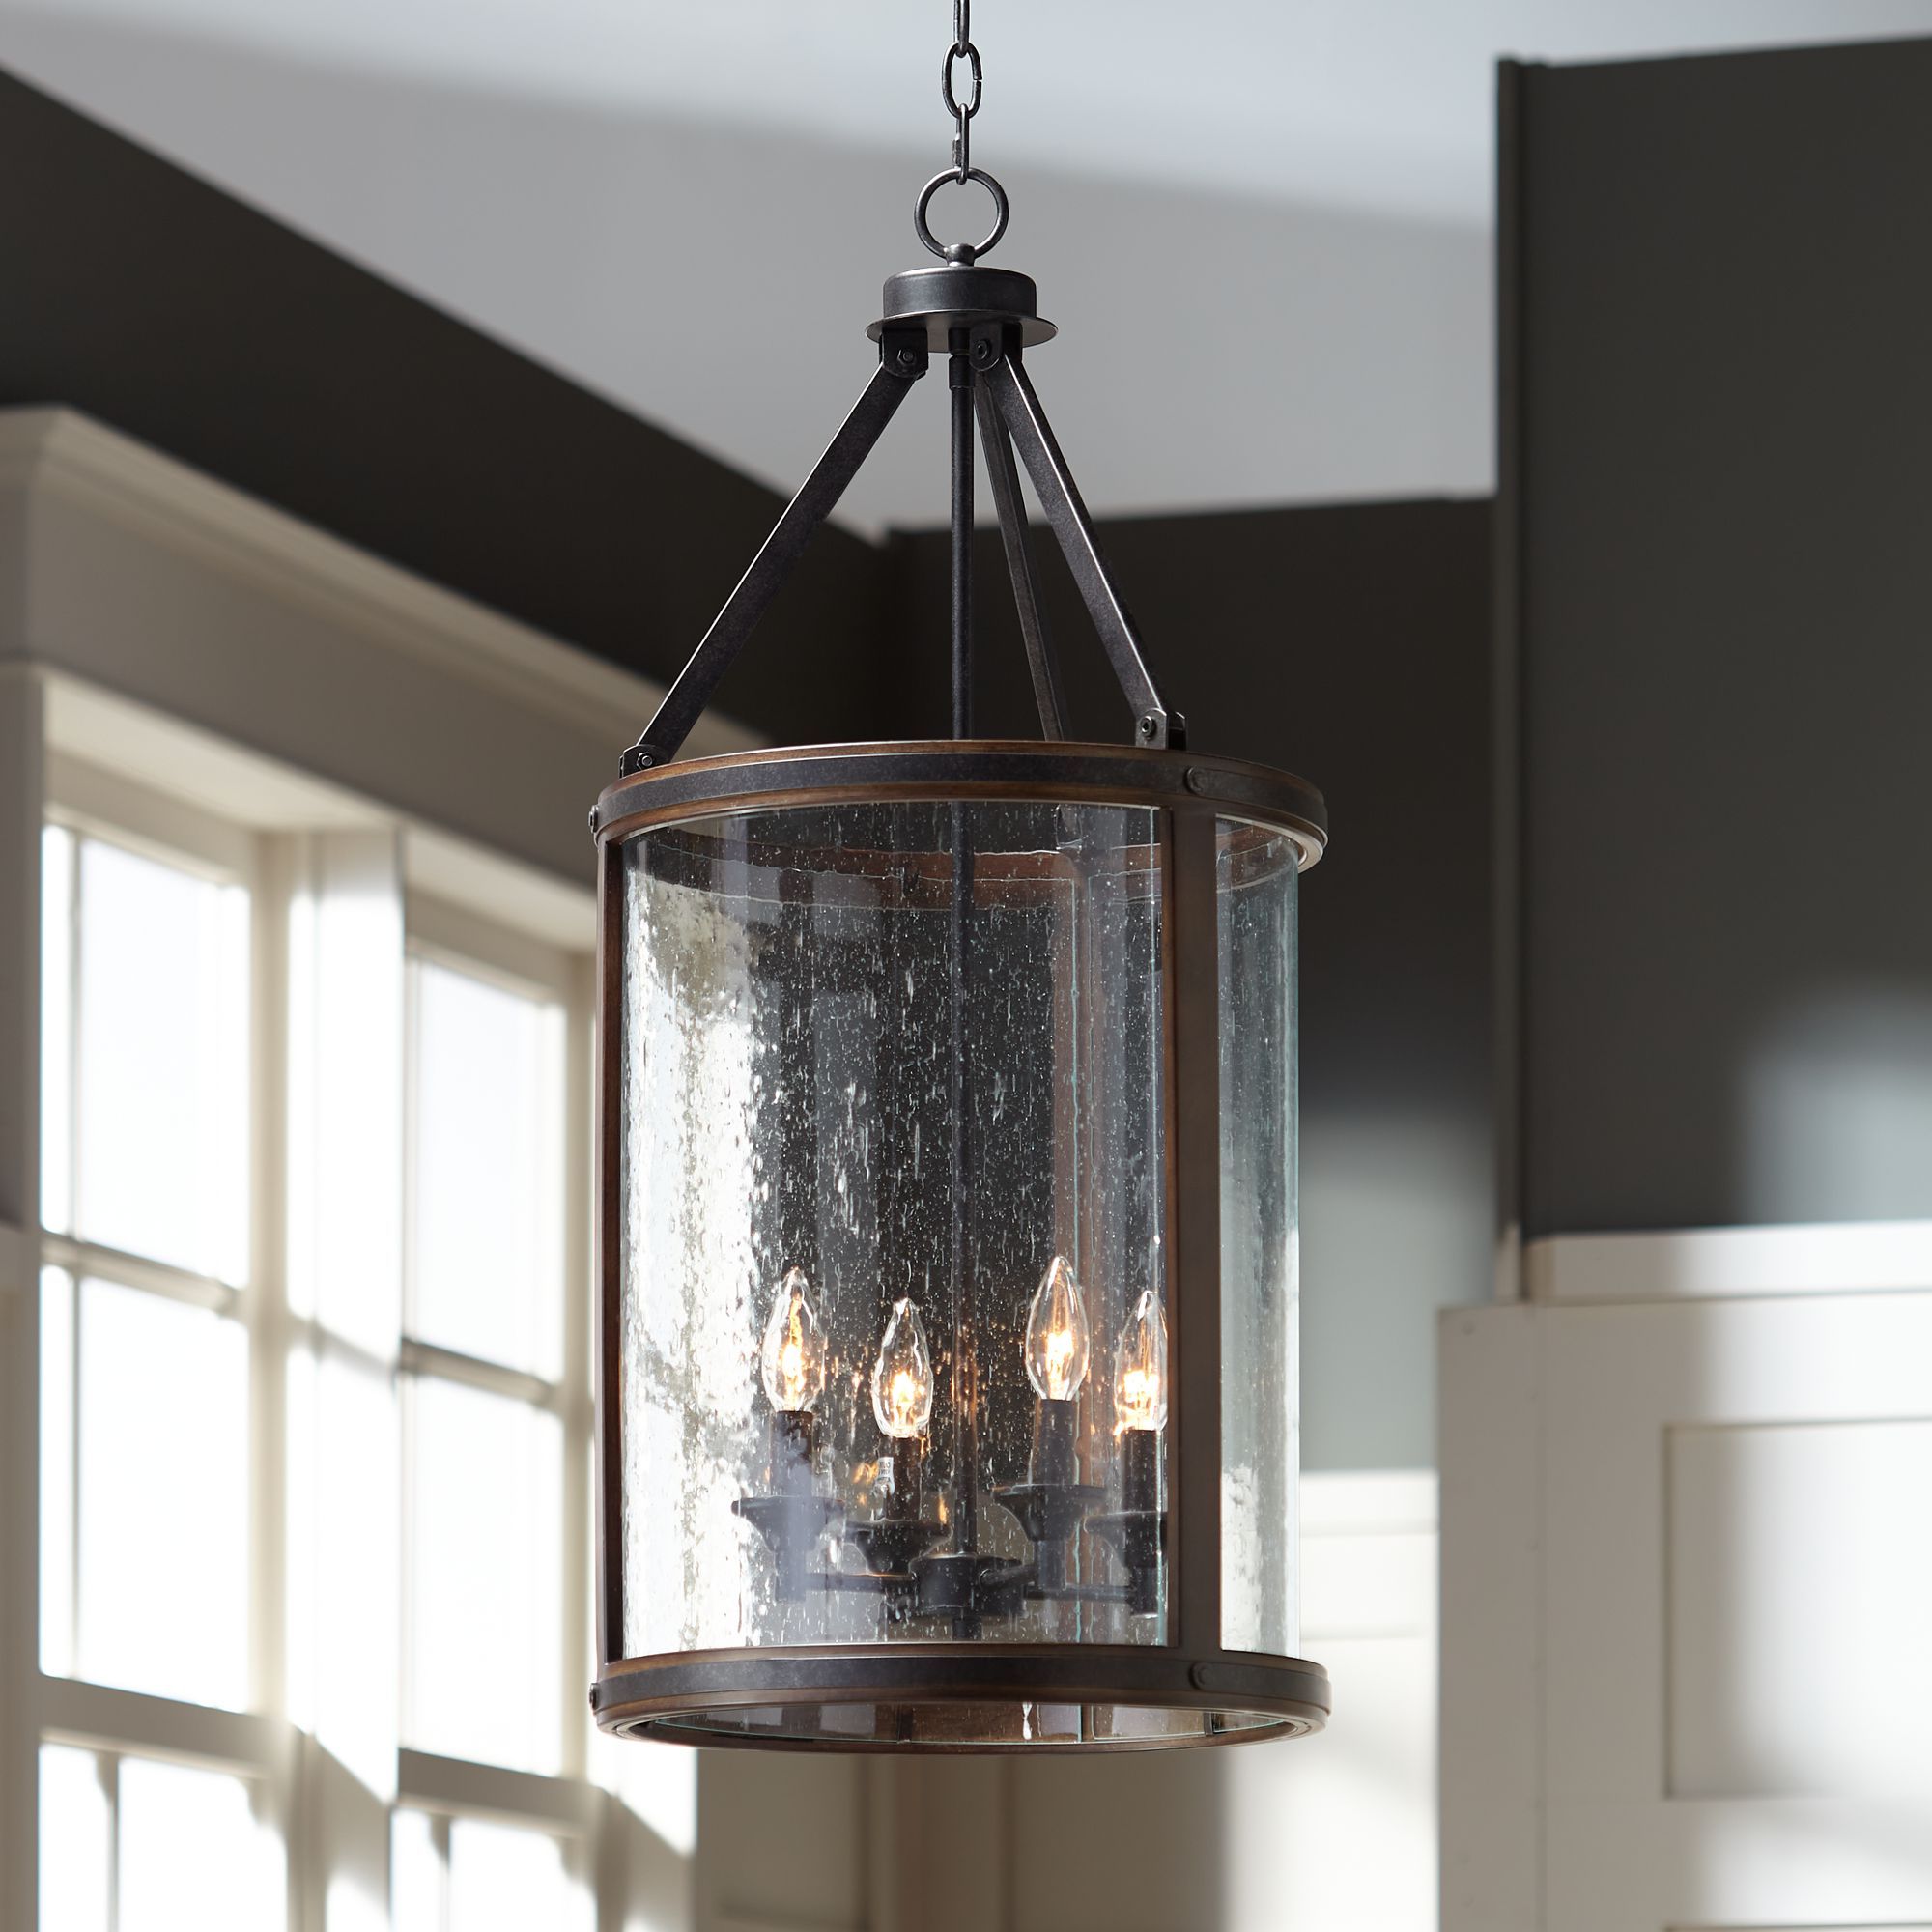 Rustic Gray Lantern Chandeliers Pertaining To Best And Newest Franklin Iron Works Metal Wood Pendant Chandelier 16" Wide Rustic Farmhouse  Clear Seeded Glass 4 Light Fixture Dining Room Foyer – Walmart (View 15 of 15)